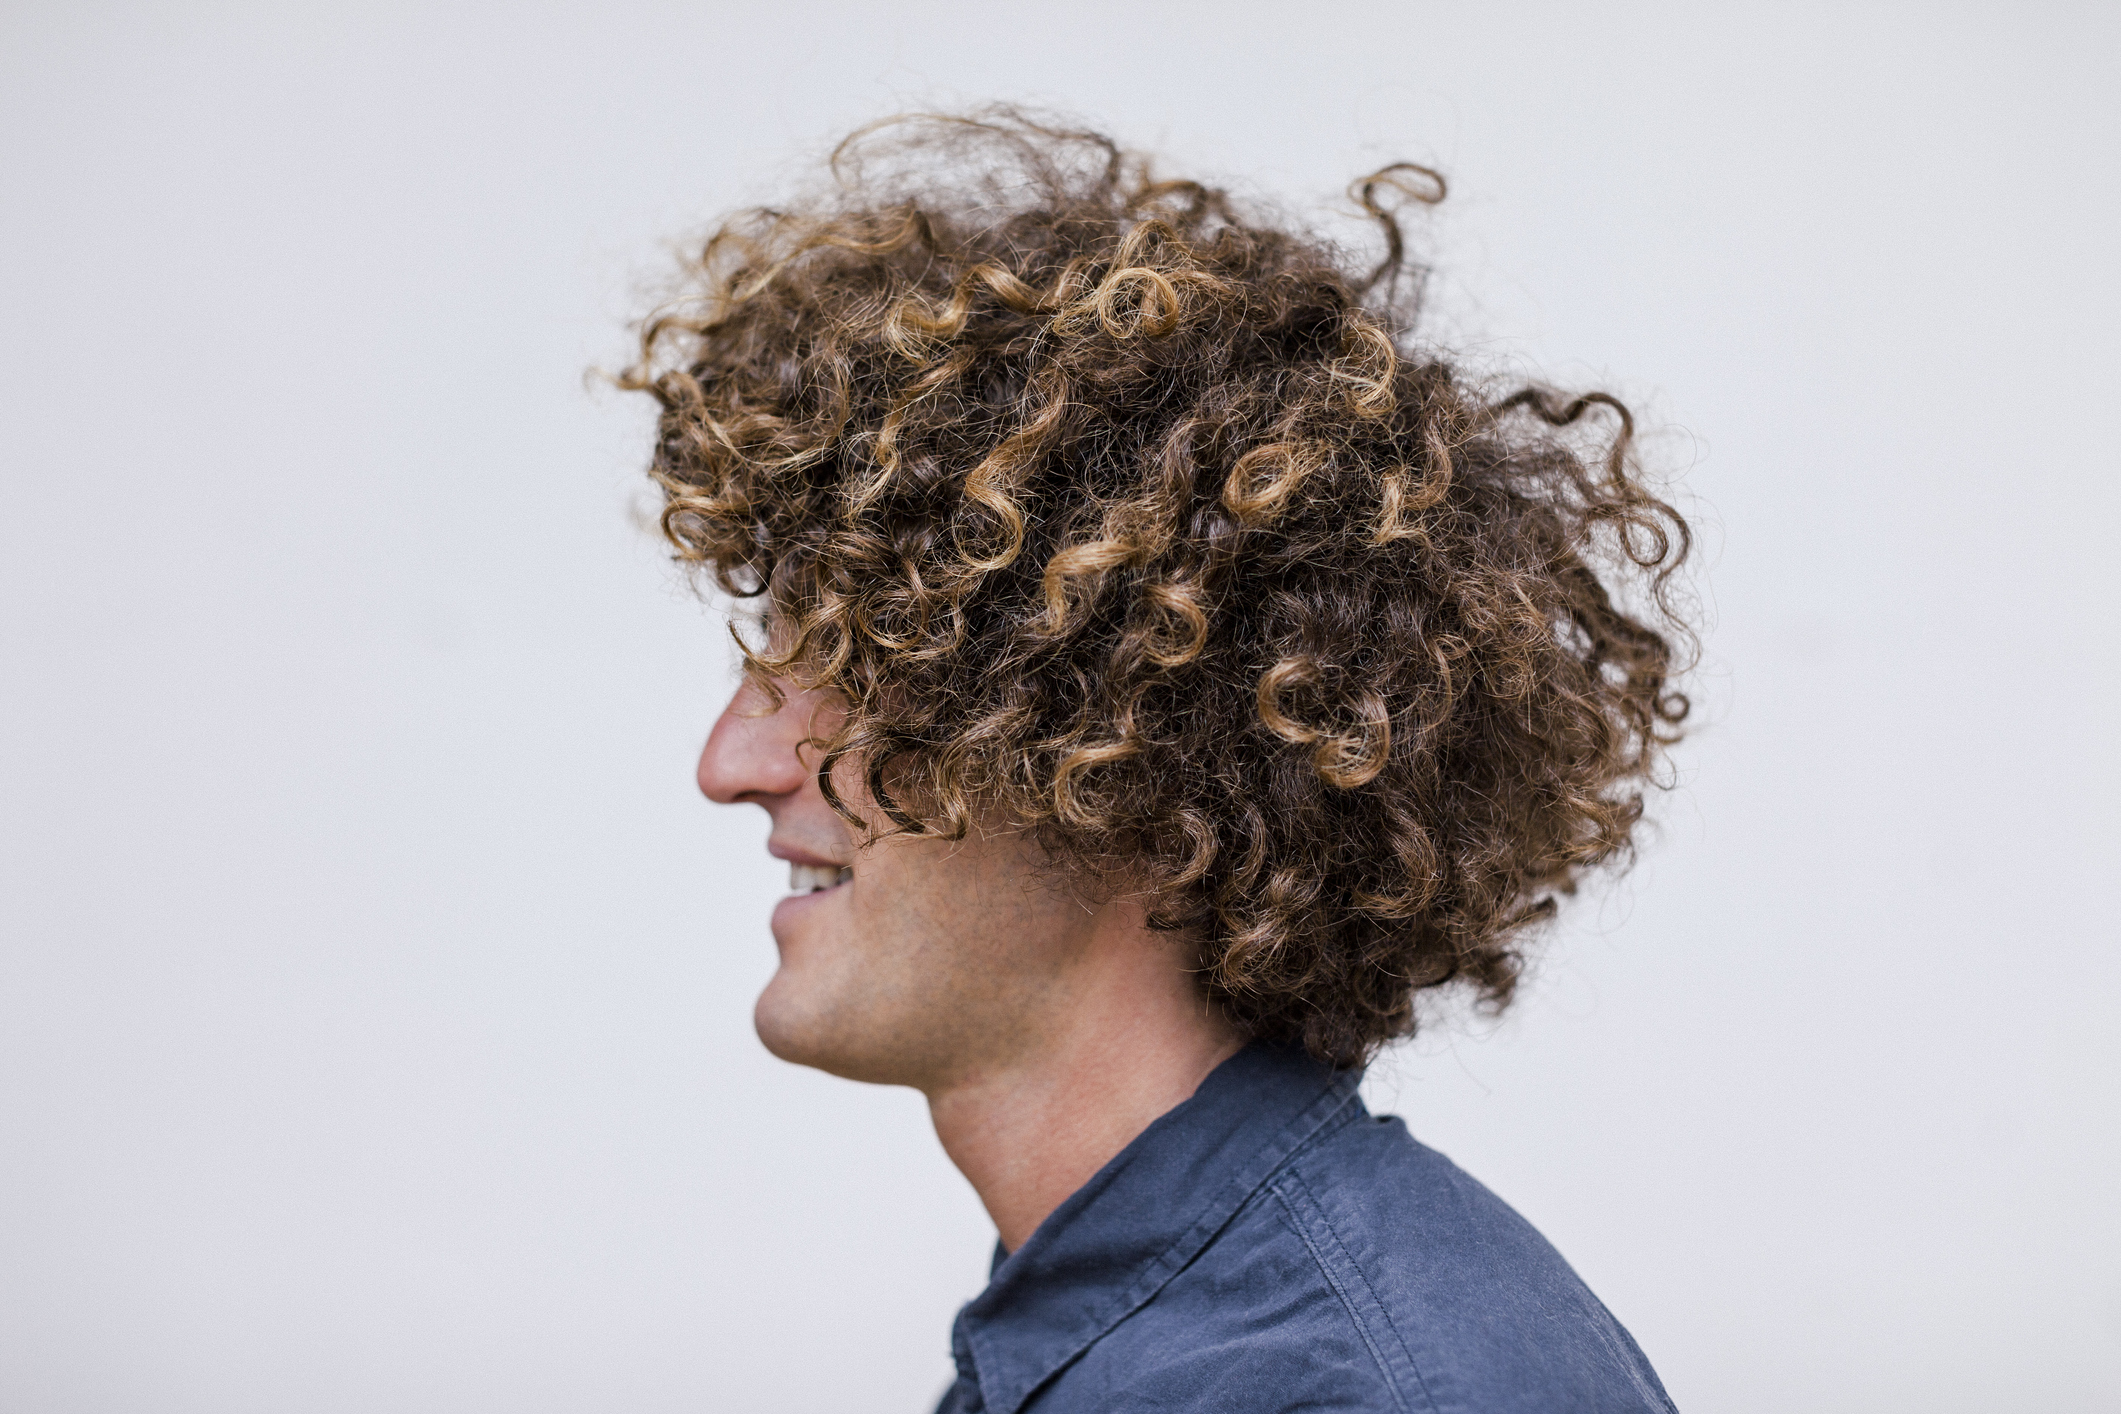 11 Hottest Men’s Curly Hairstyles That Attract Women